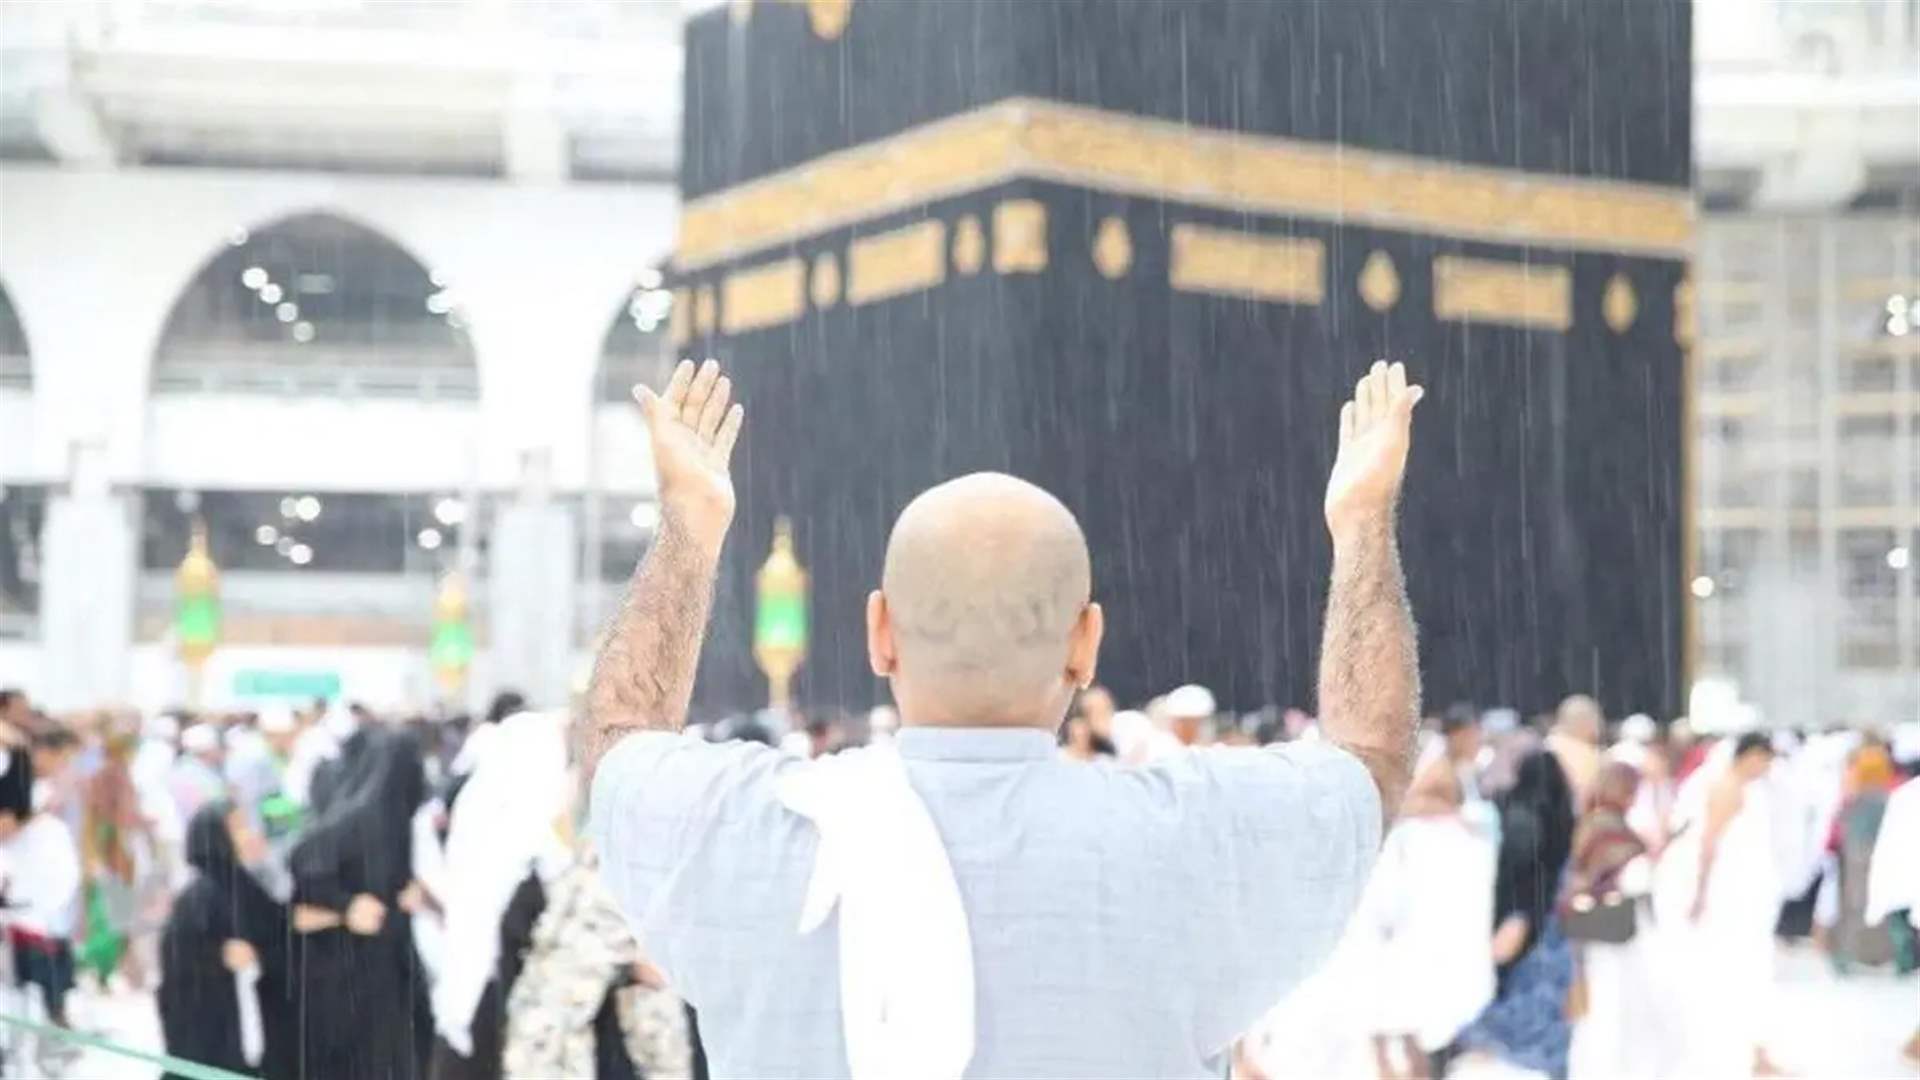 Strong winds and heavy rain hit Mecca